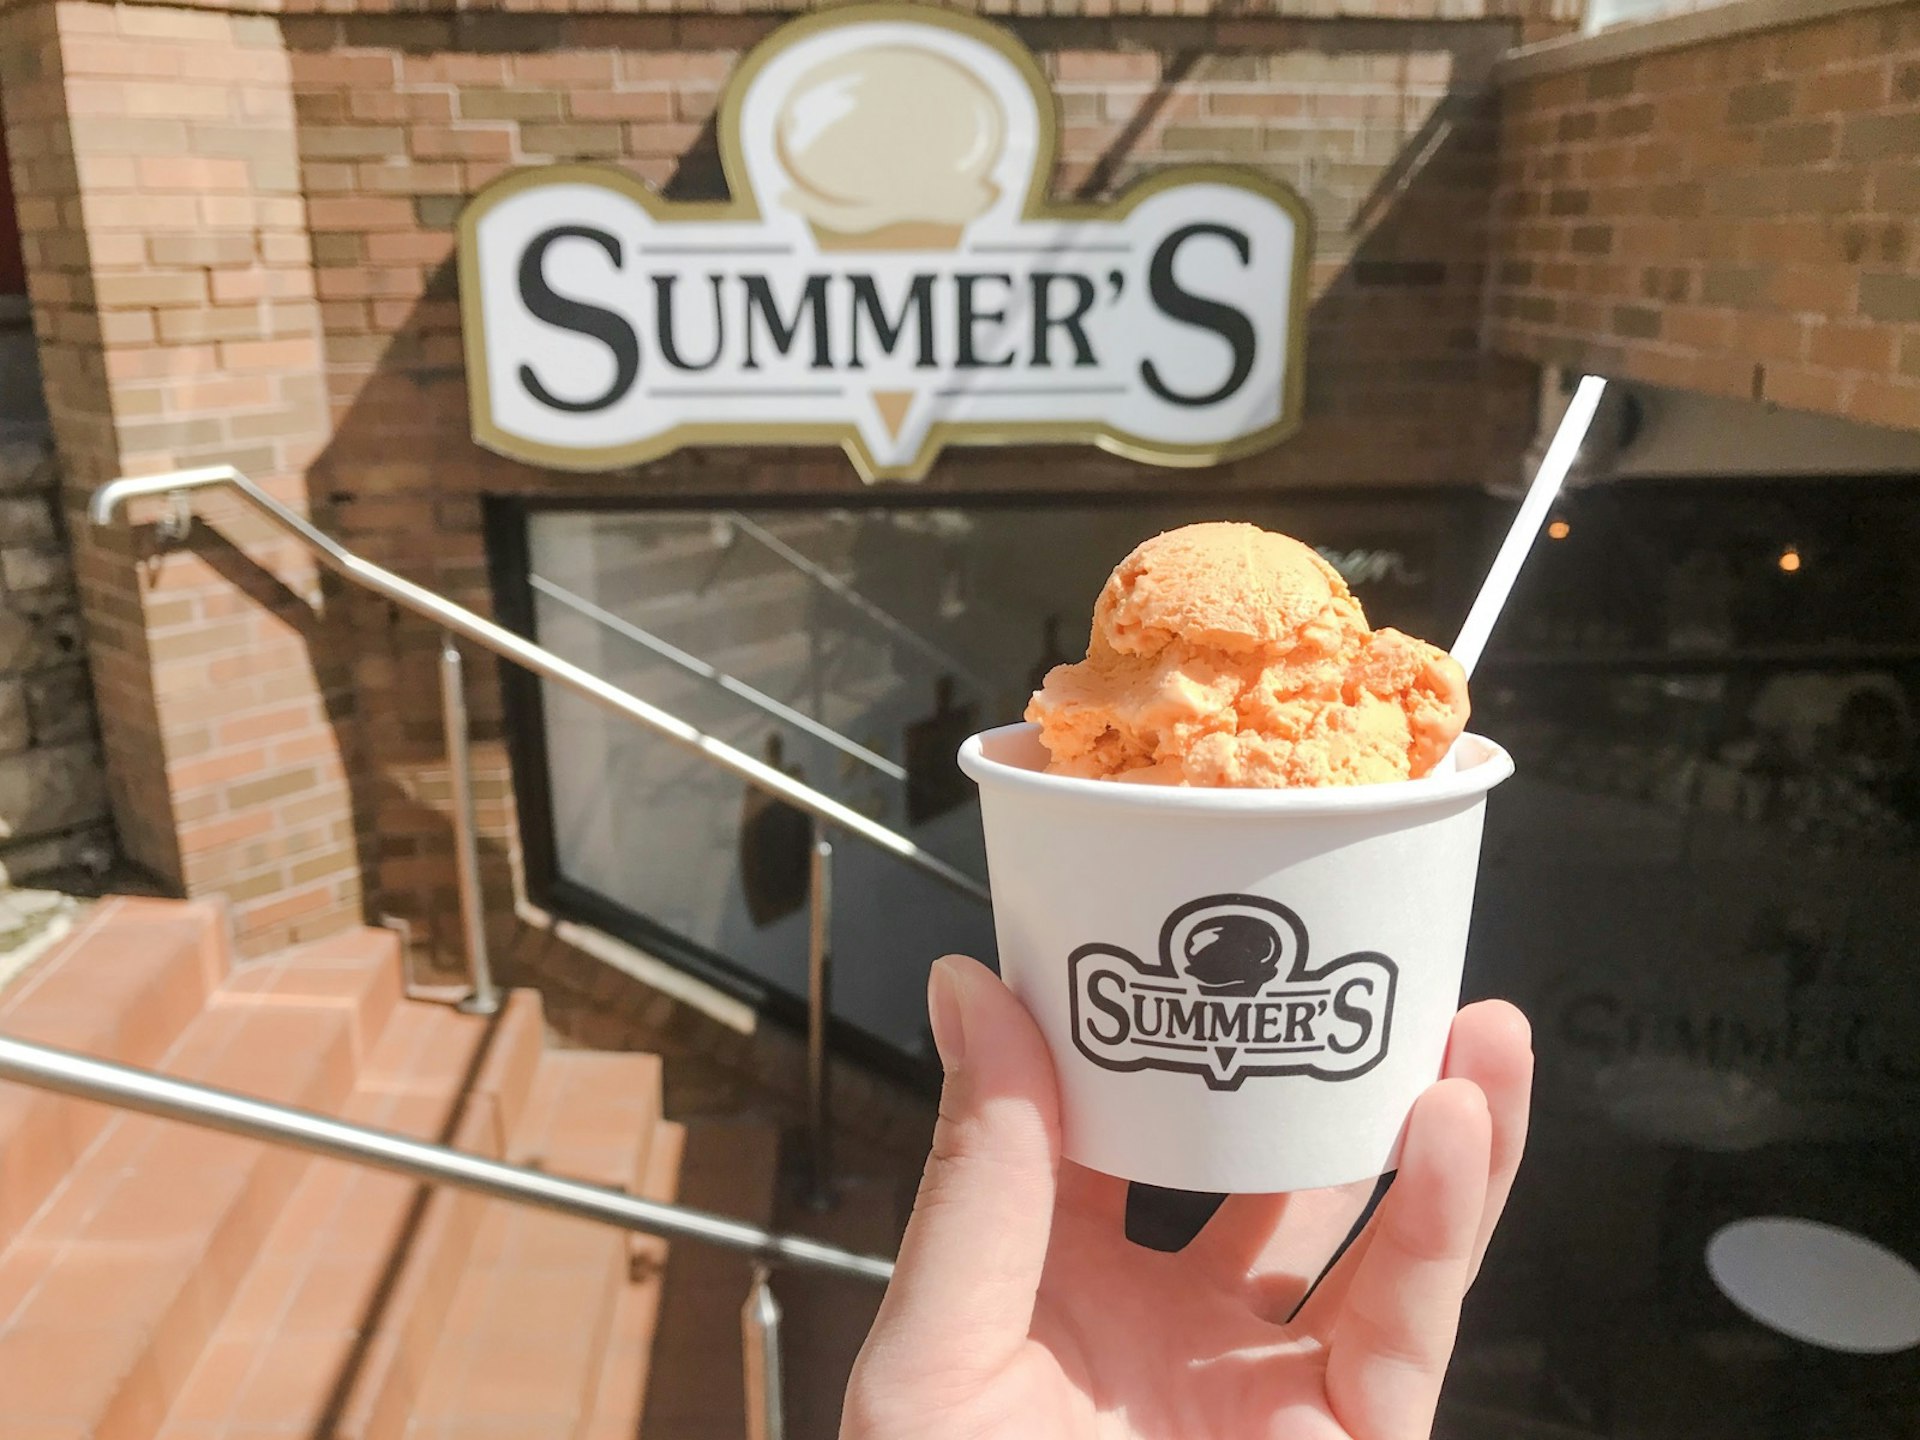 A hand holds a dainty cup with a scoop of ice cream in it in front of a sign that says Summer's.